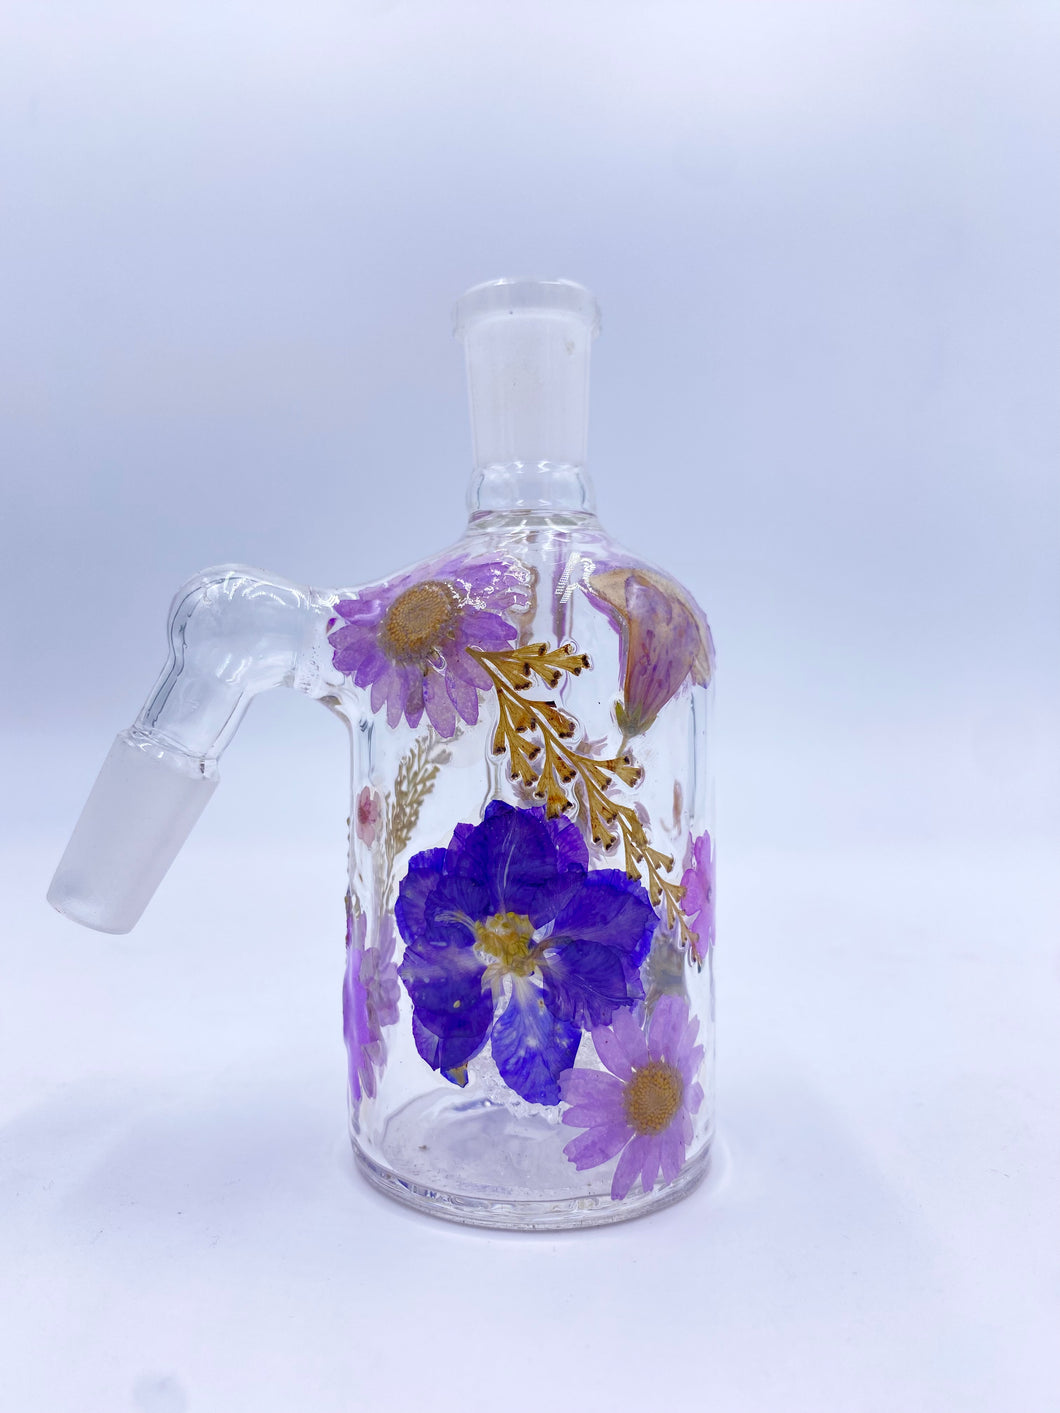 Flower ash catcher with real flowers